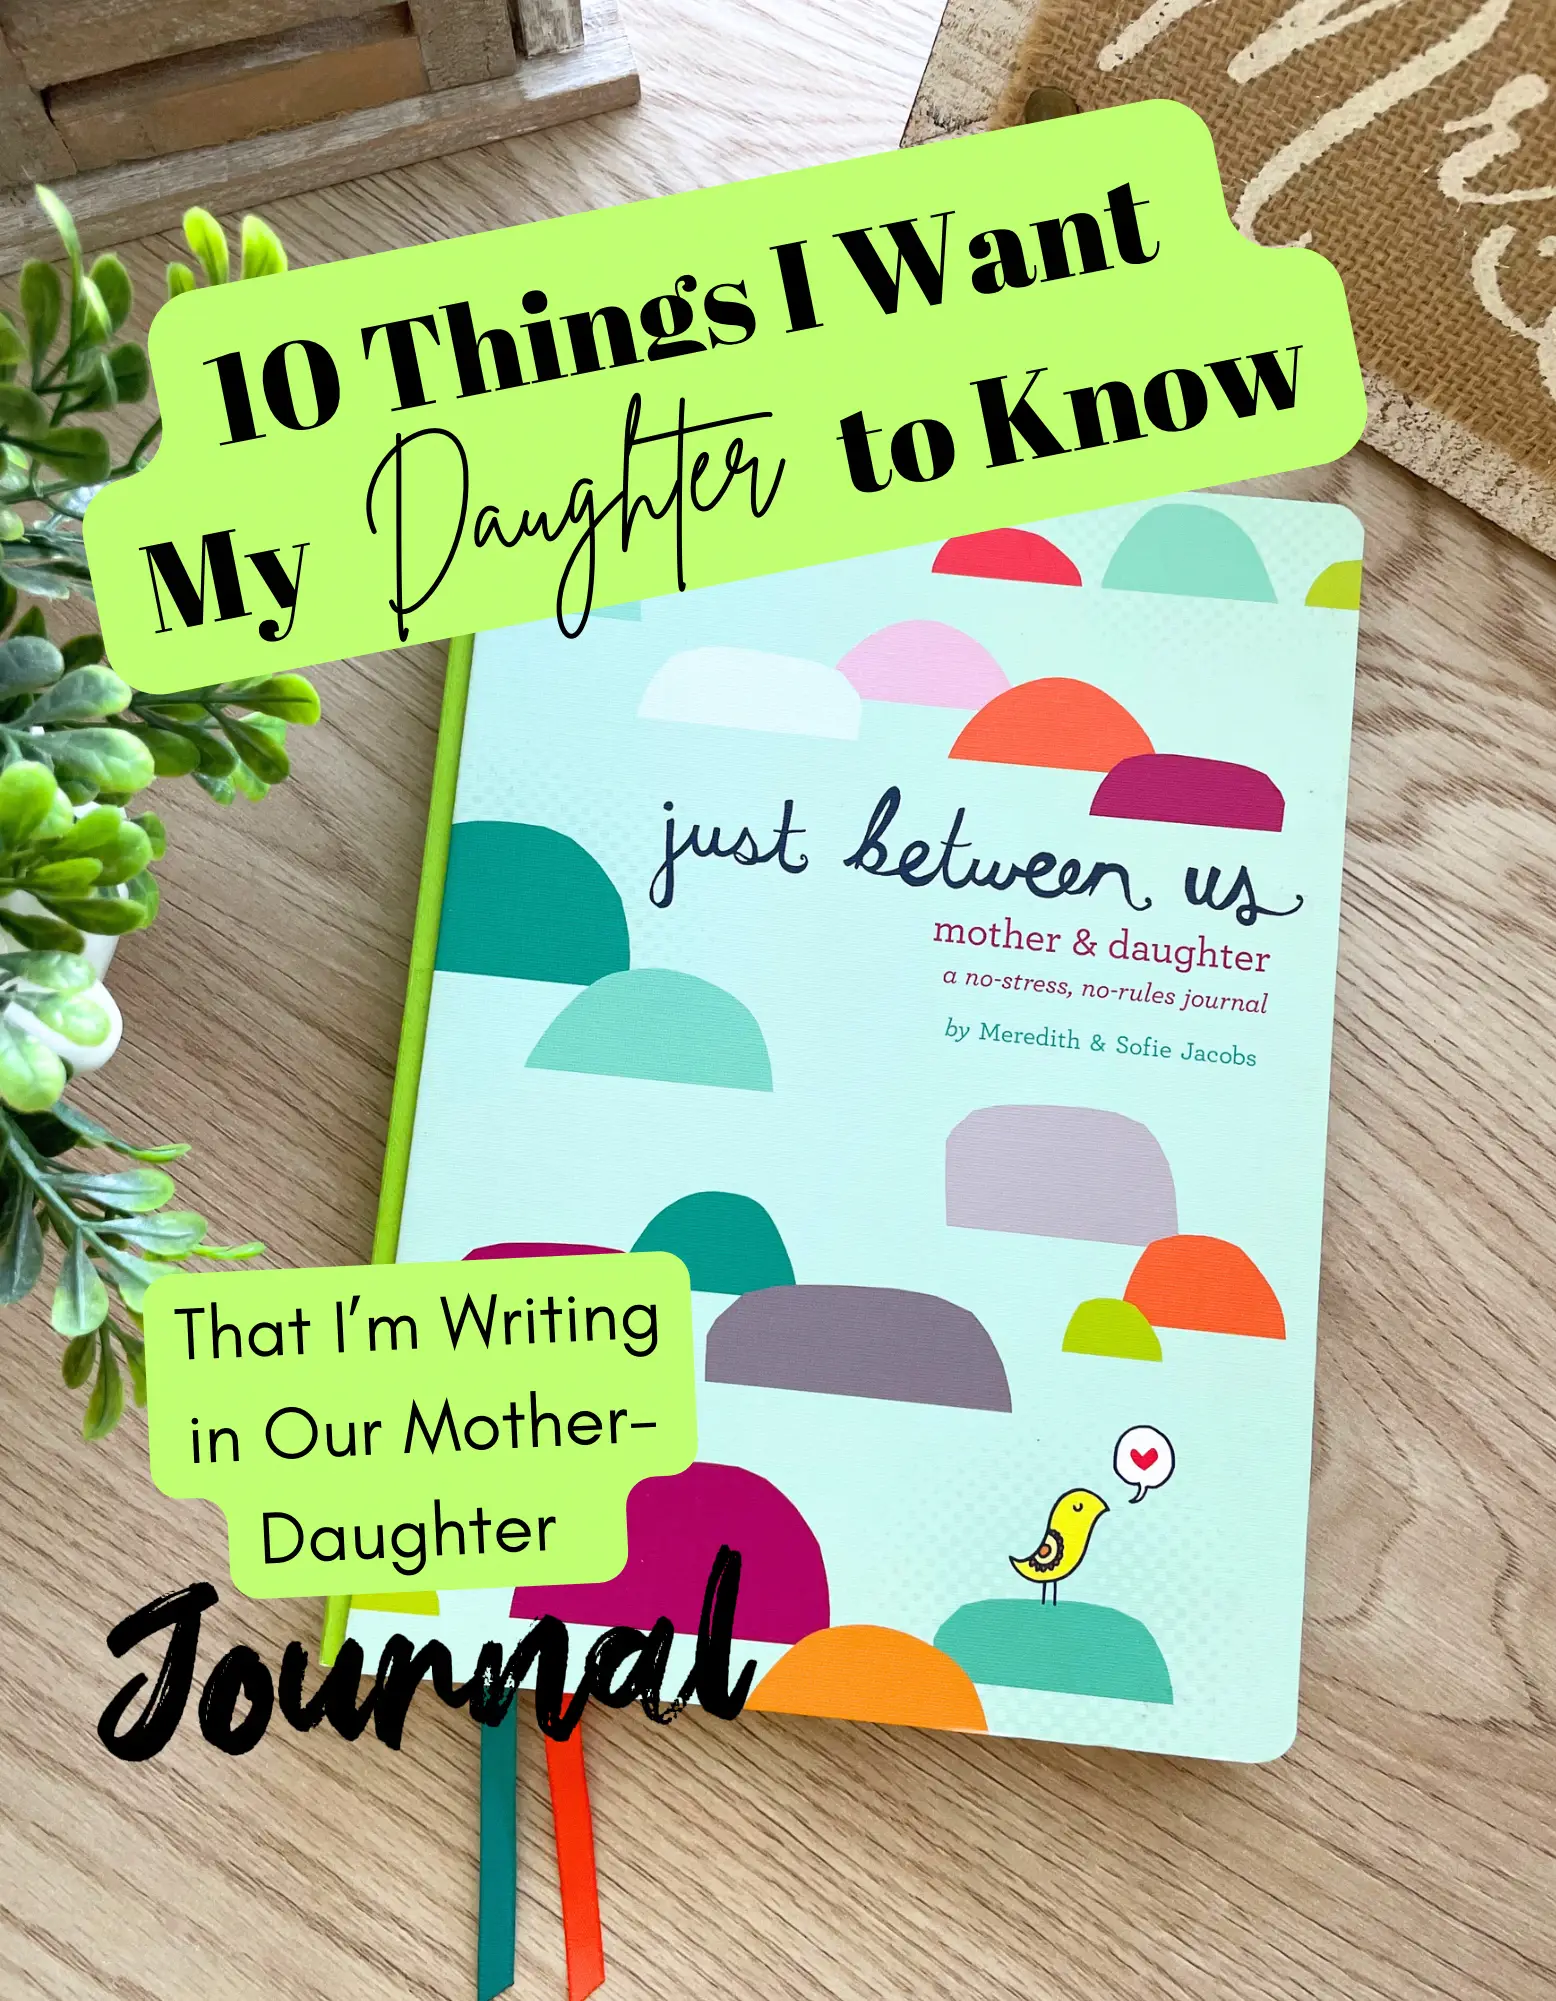 Just Between Us: Mother and Daughter: a No-Stress, No-Rules Journal  (Activity Journal for Teen Girls and Moms, Diary for Tween Girls)